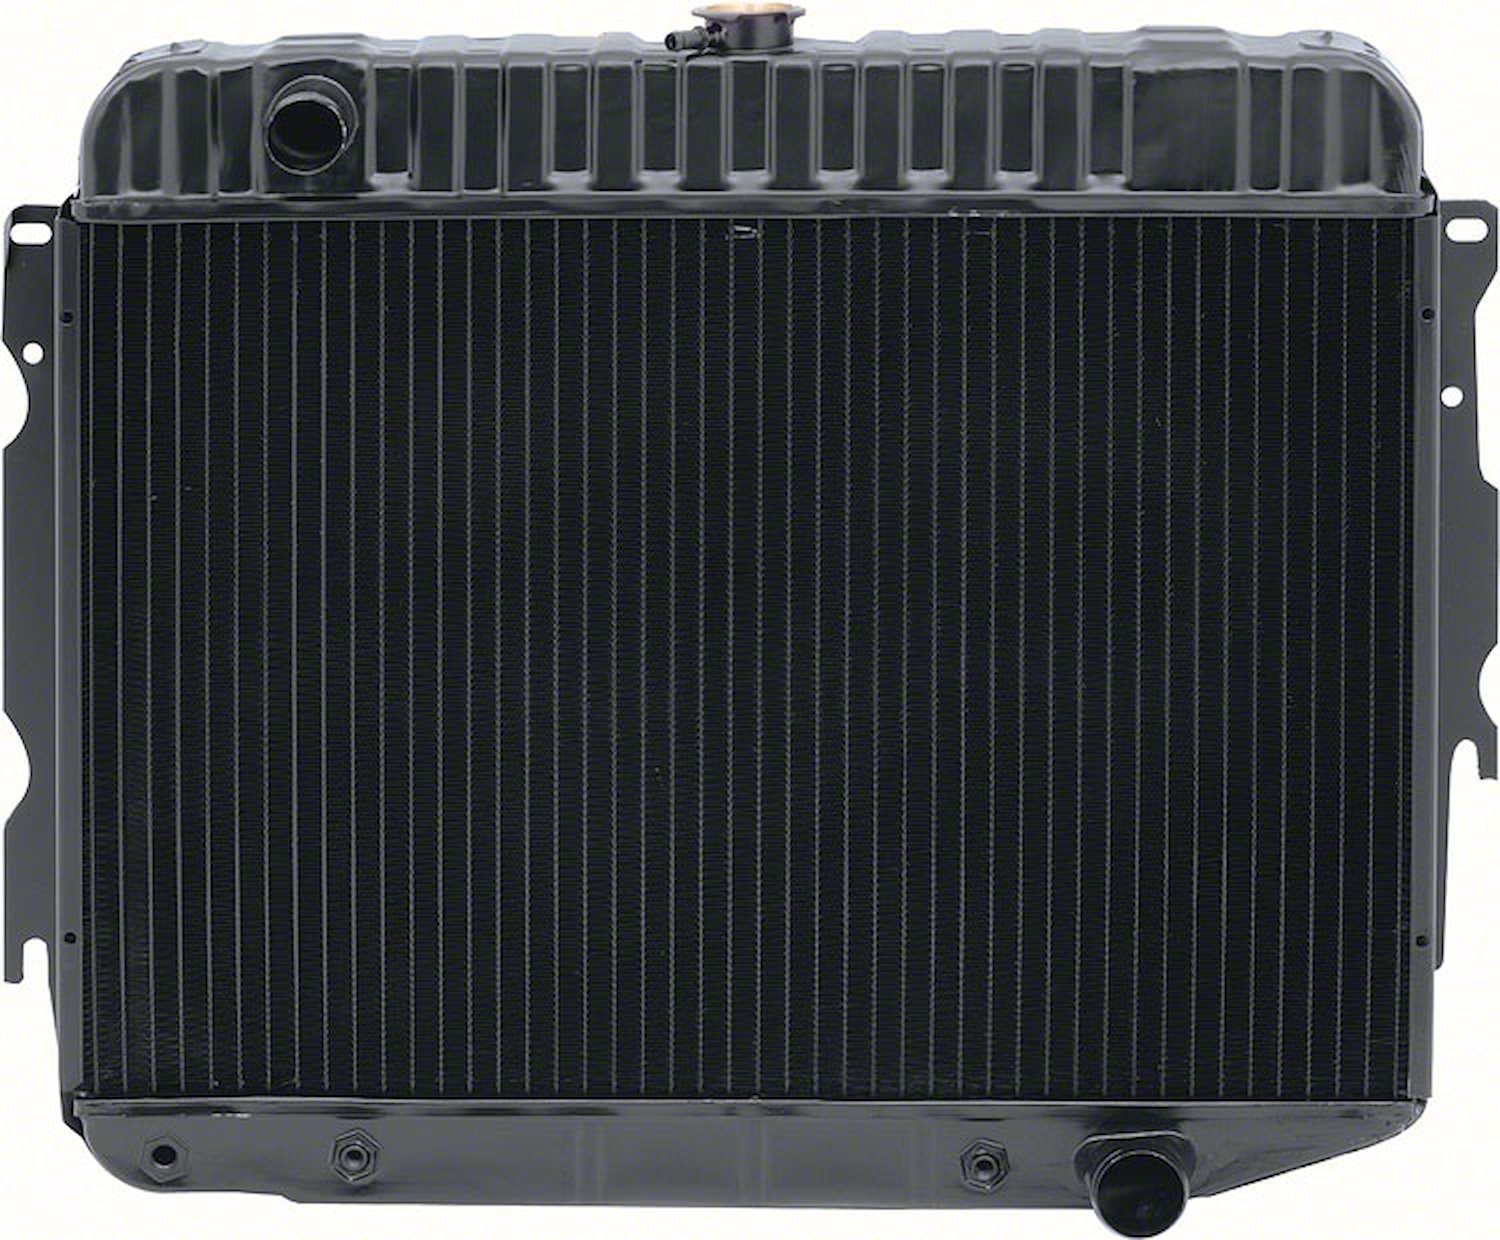 MD2295A Replacement Radiator 1970-72 Mopar B/E-Body Small Block V8 With Automatic Trans, 22" Wide, 4 Row